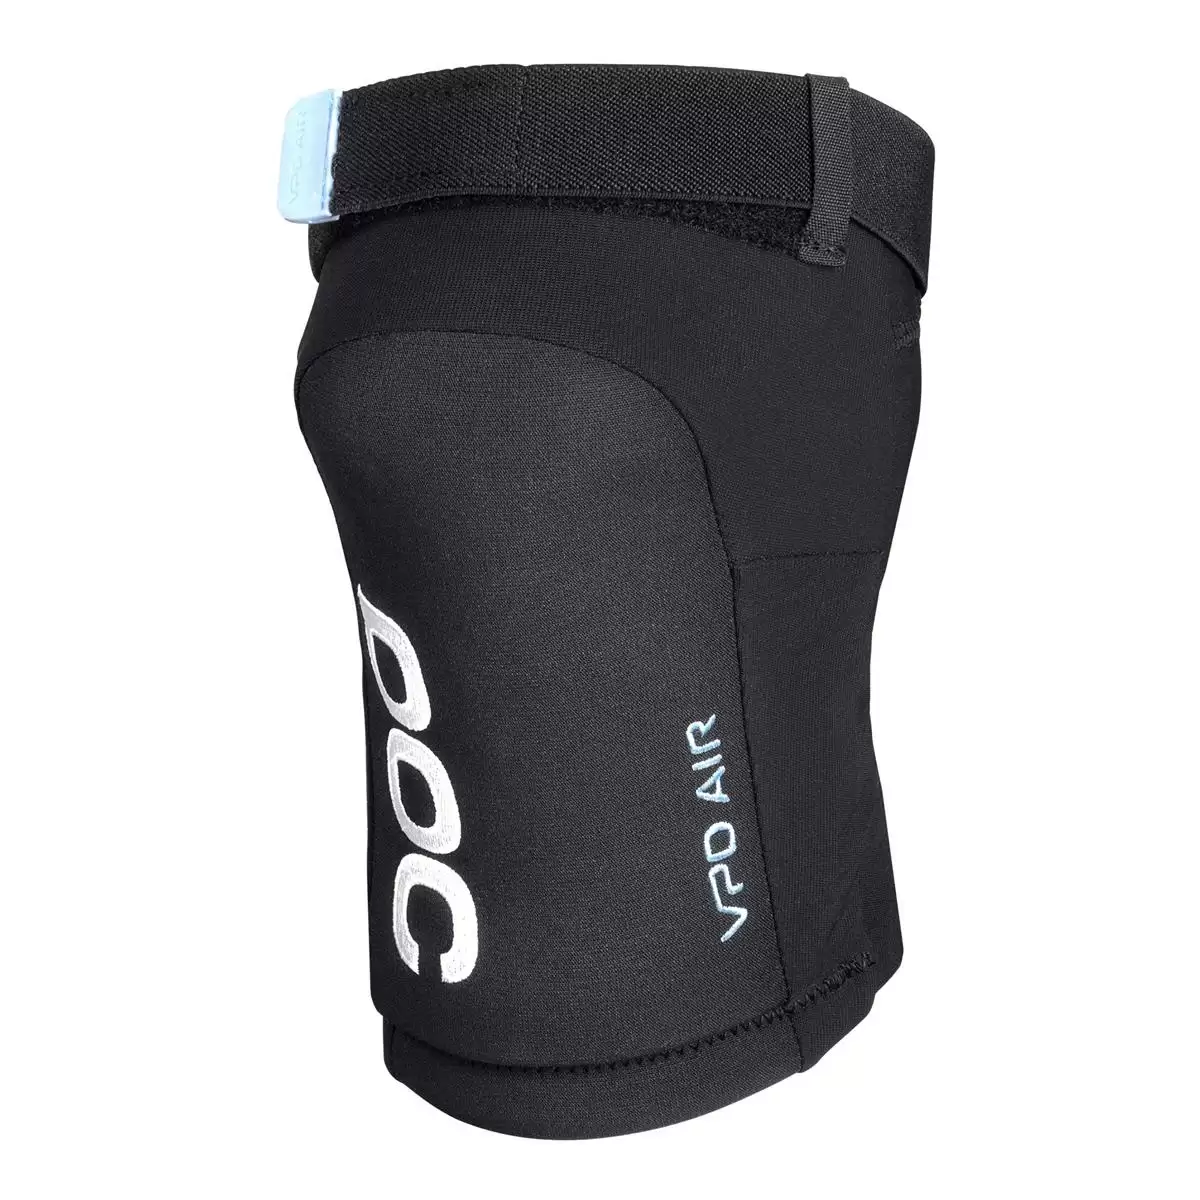 Joint VPD Air Knee pads black Size M #1